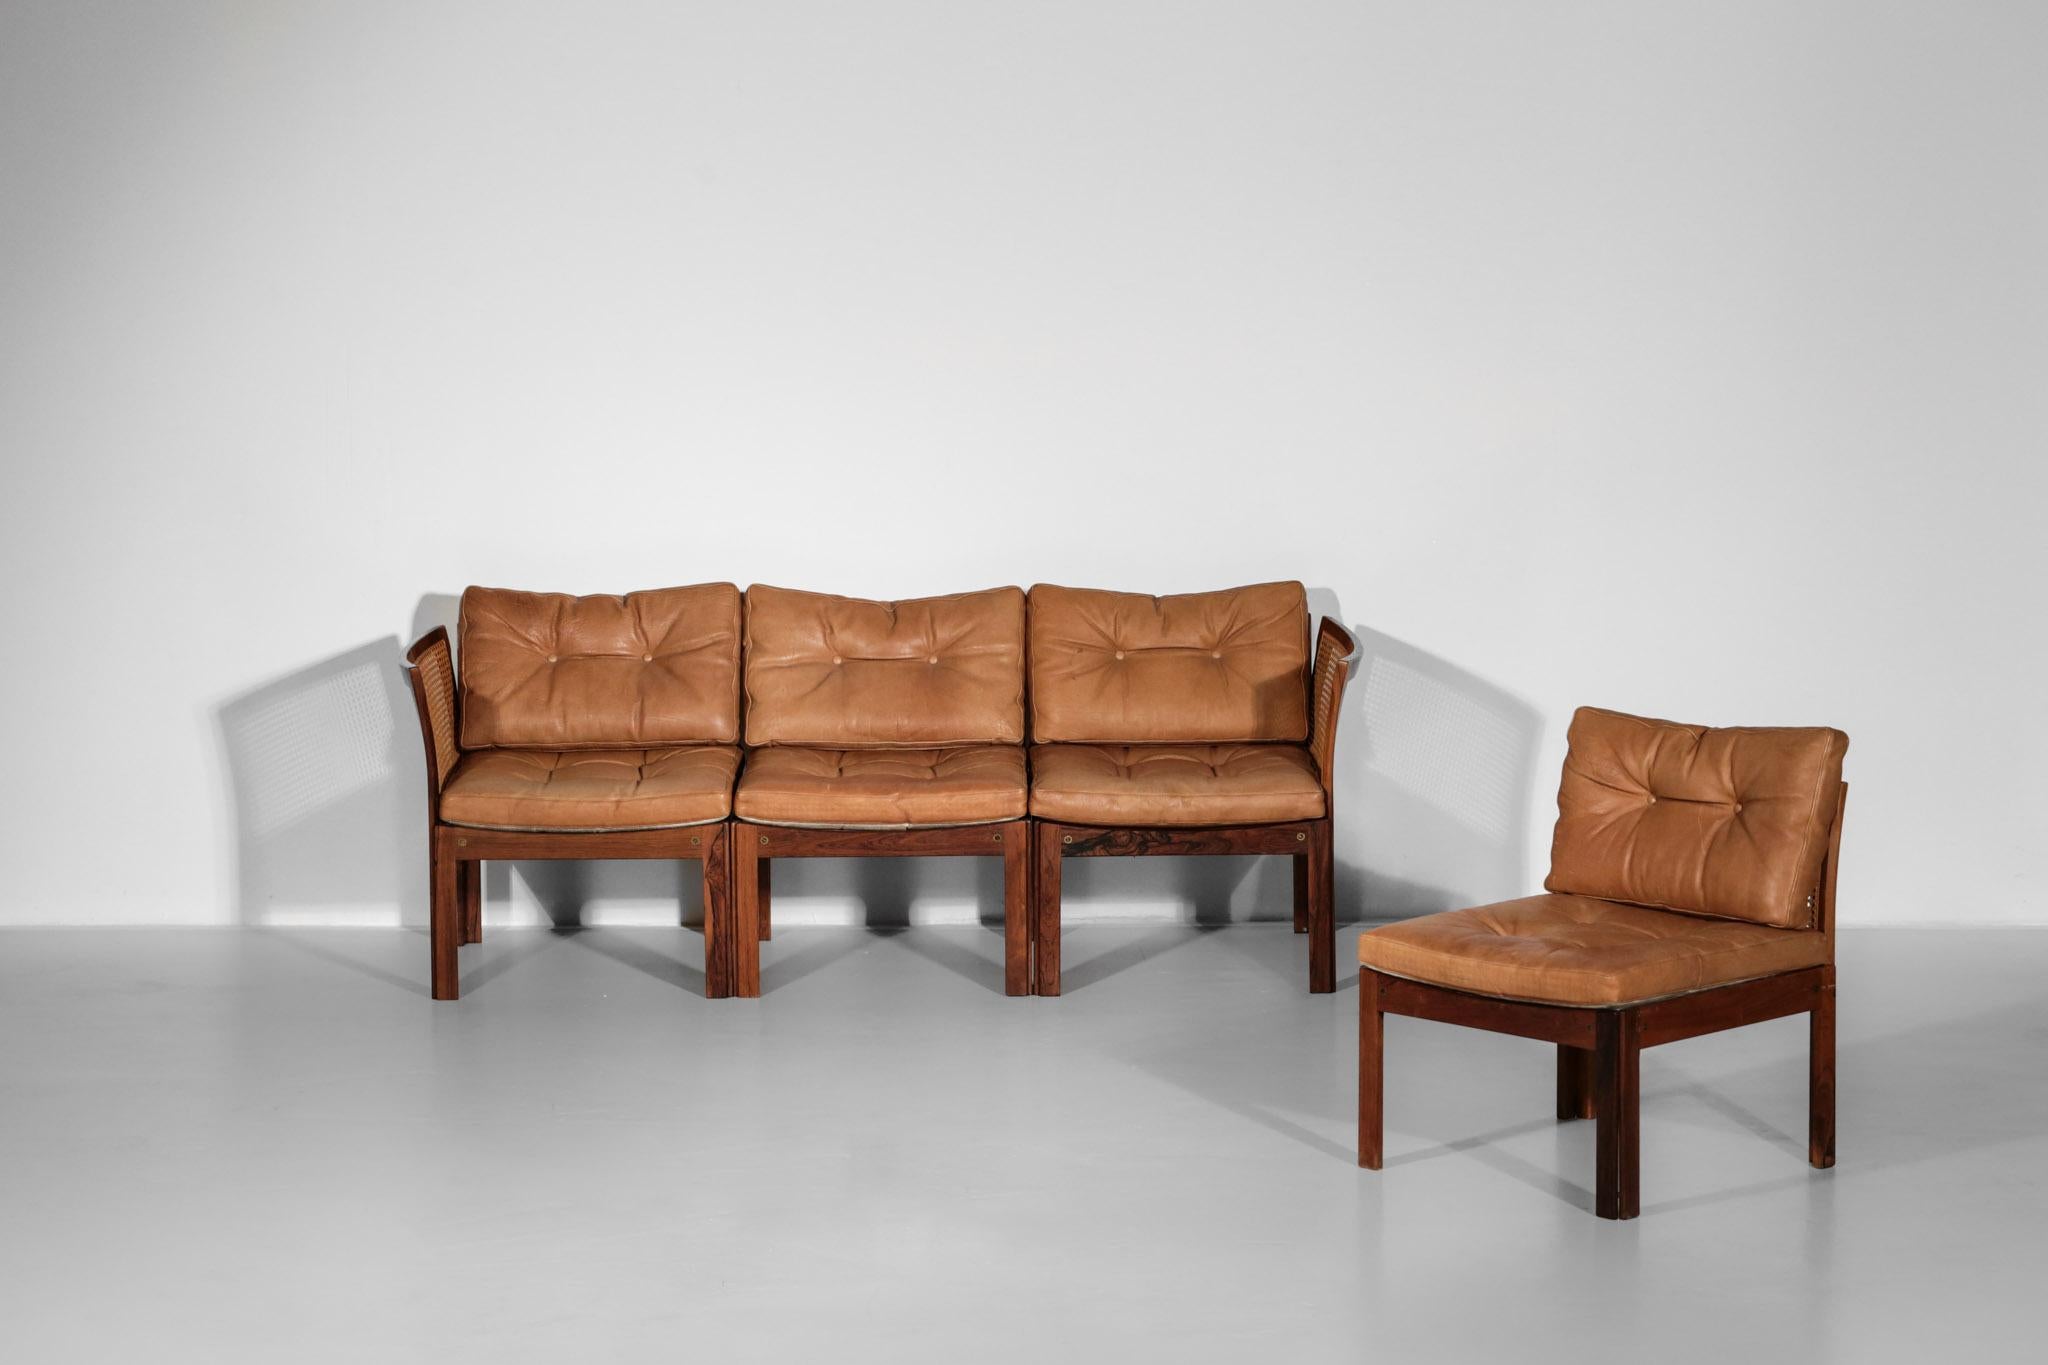 Illum Wikkelso Leather Sofa in Rosewood and Woven Rattan Cane For Sale 9